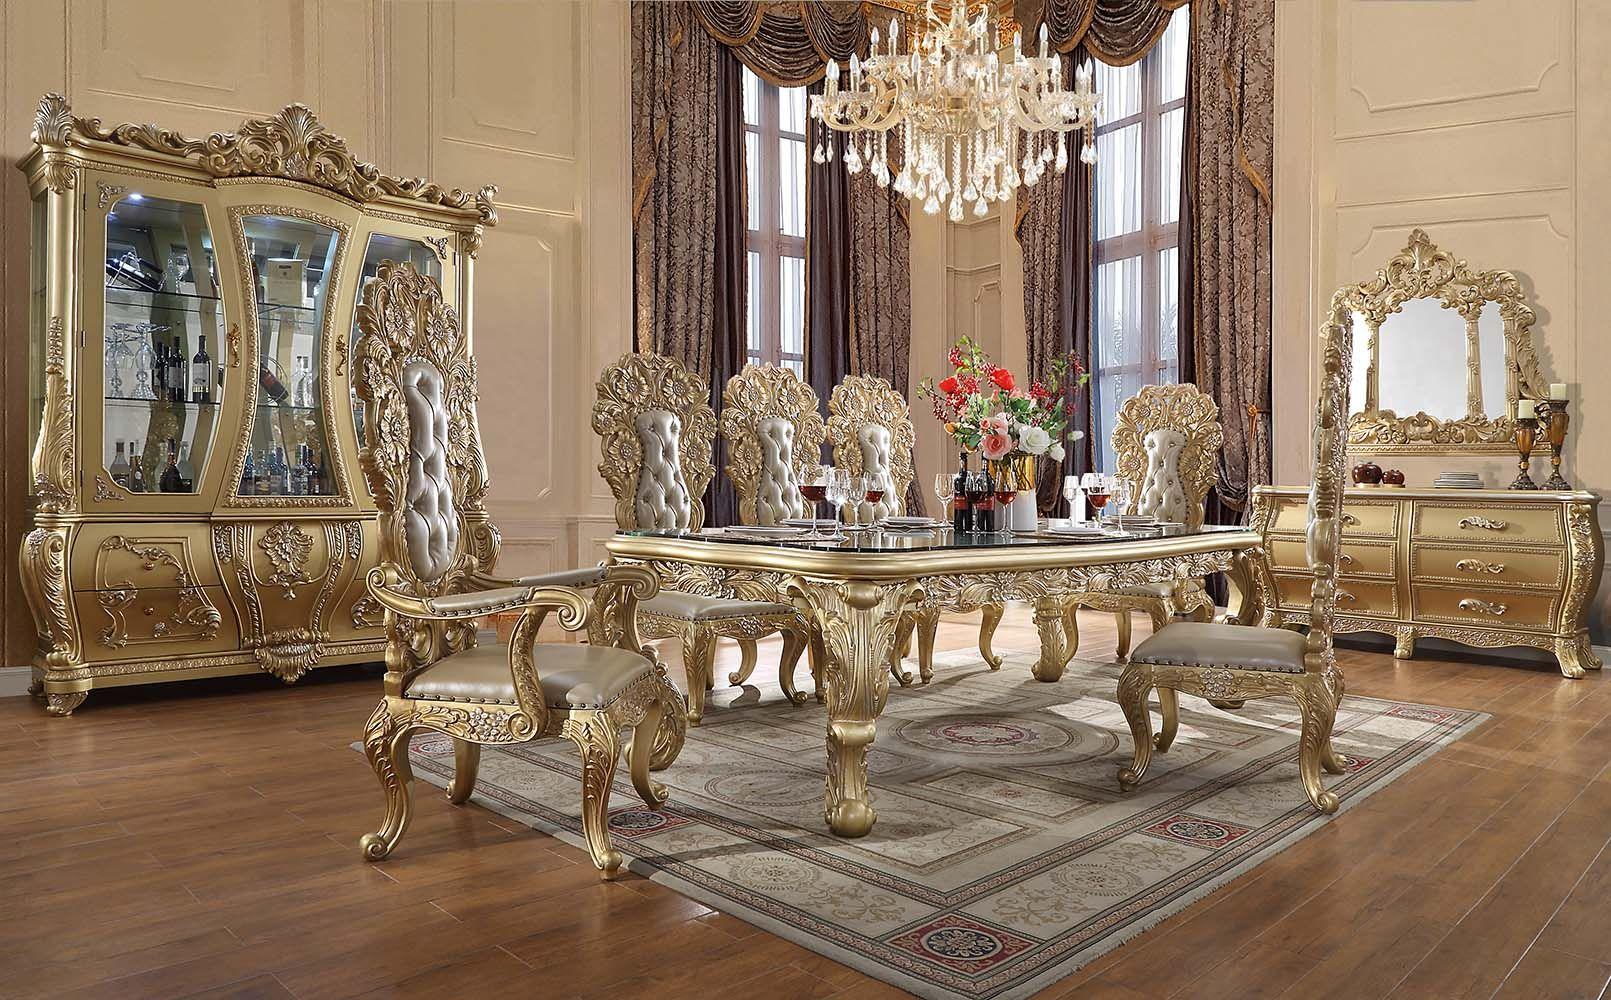 Classic Dining Room Set Cabriole Dining Room Set 10PCS DN01482-S-10PCS DN01482-S-10PCS in Gold PU